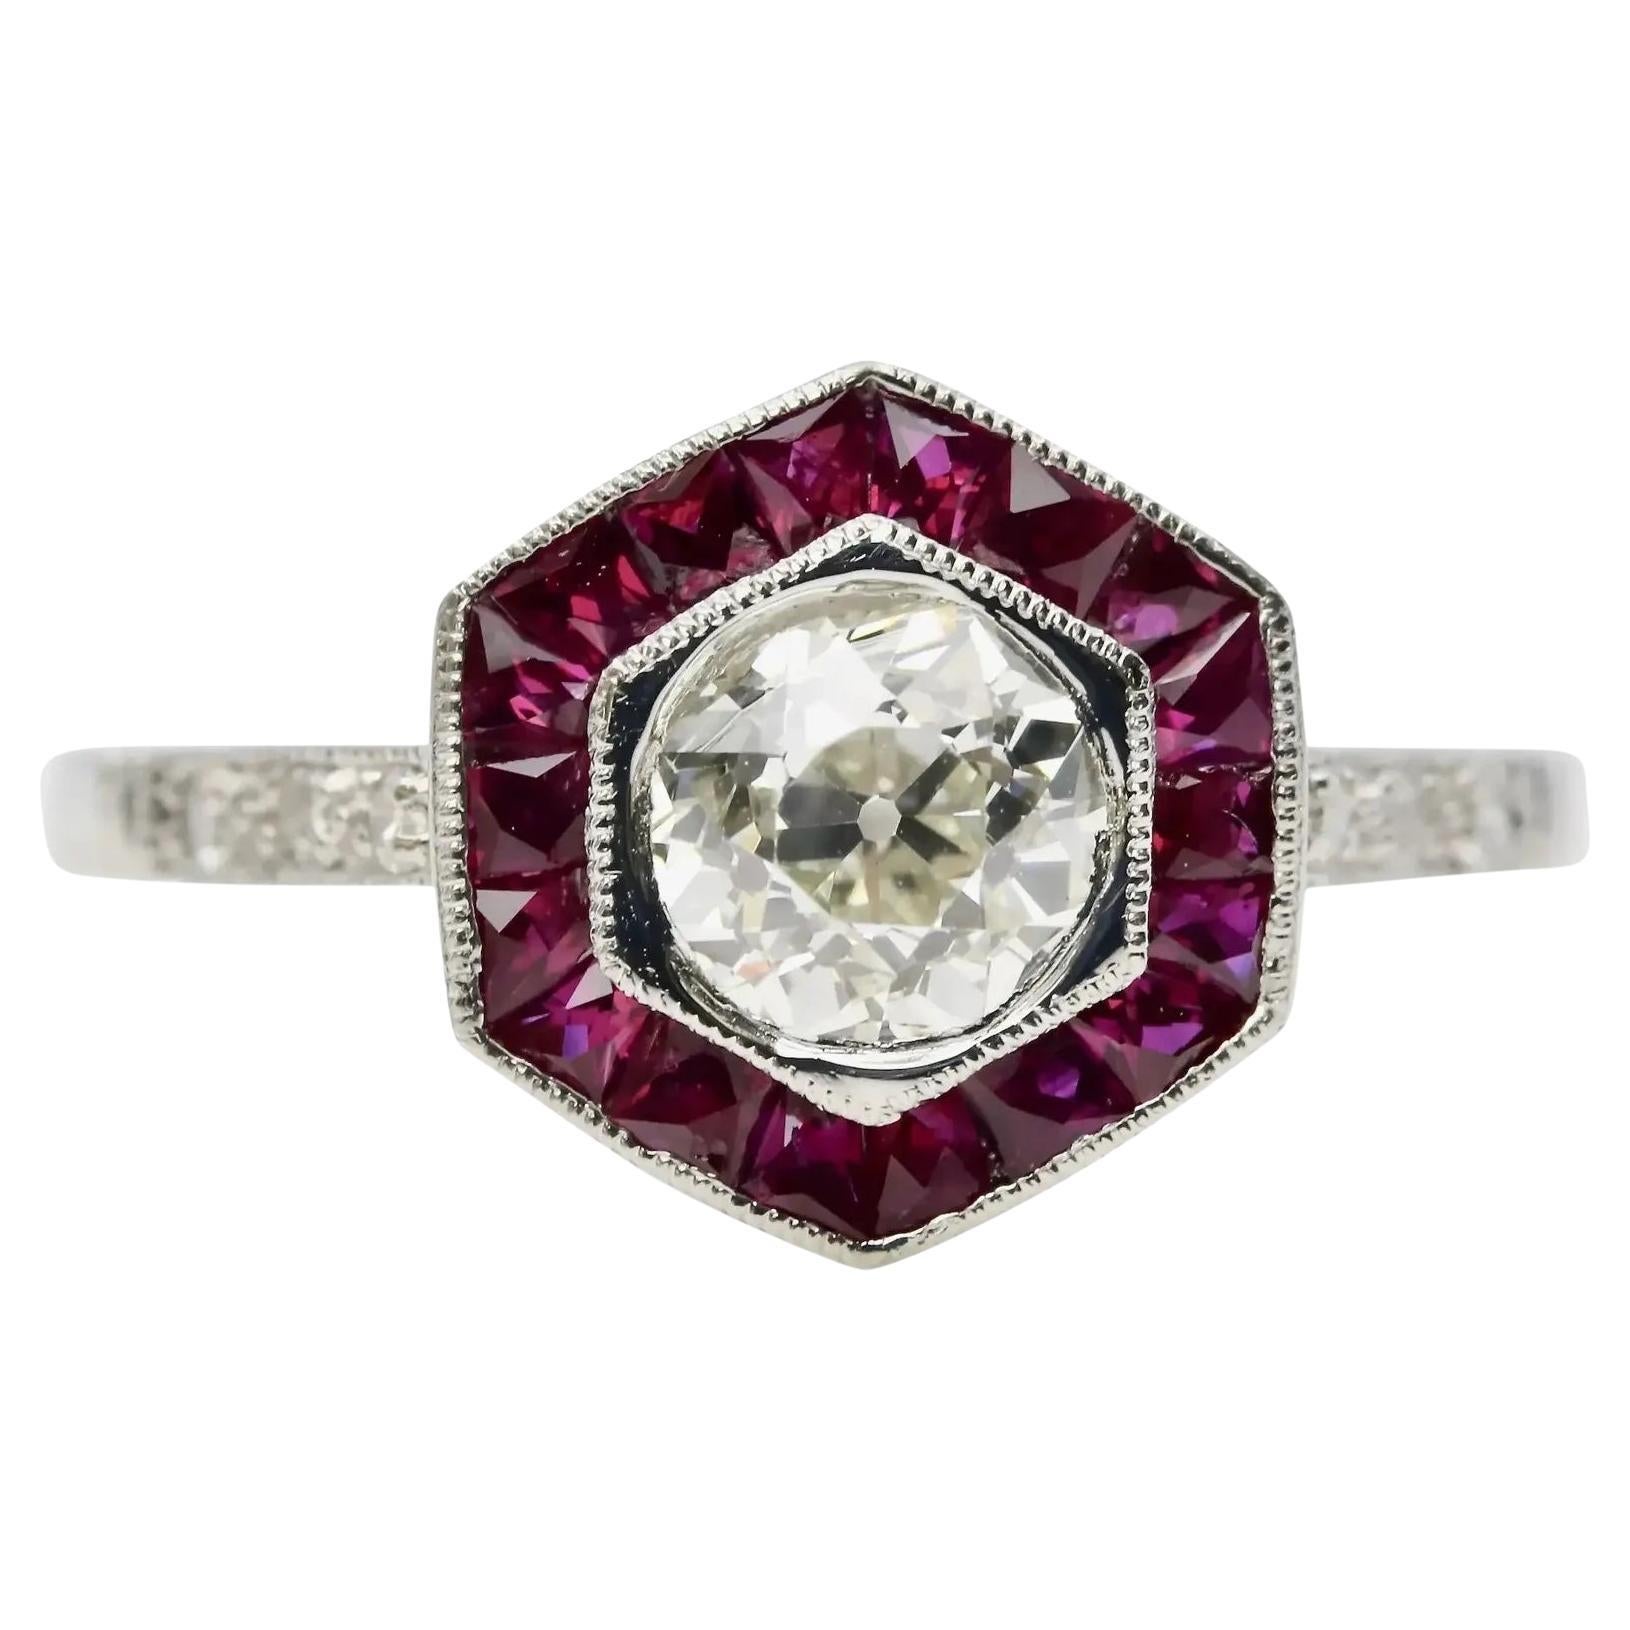 Art Deco 1.53 CTW Diamond & French Cut Ruby Engagement Ring in Platinum